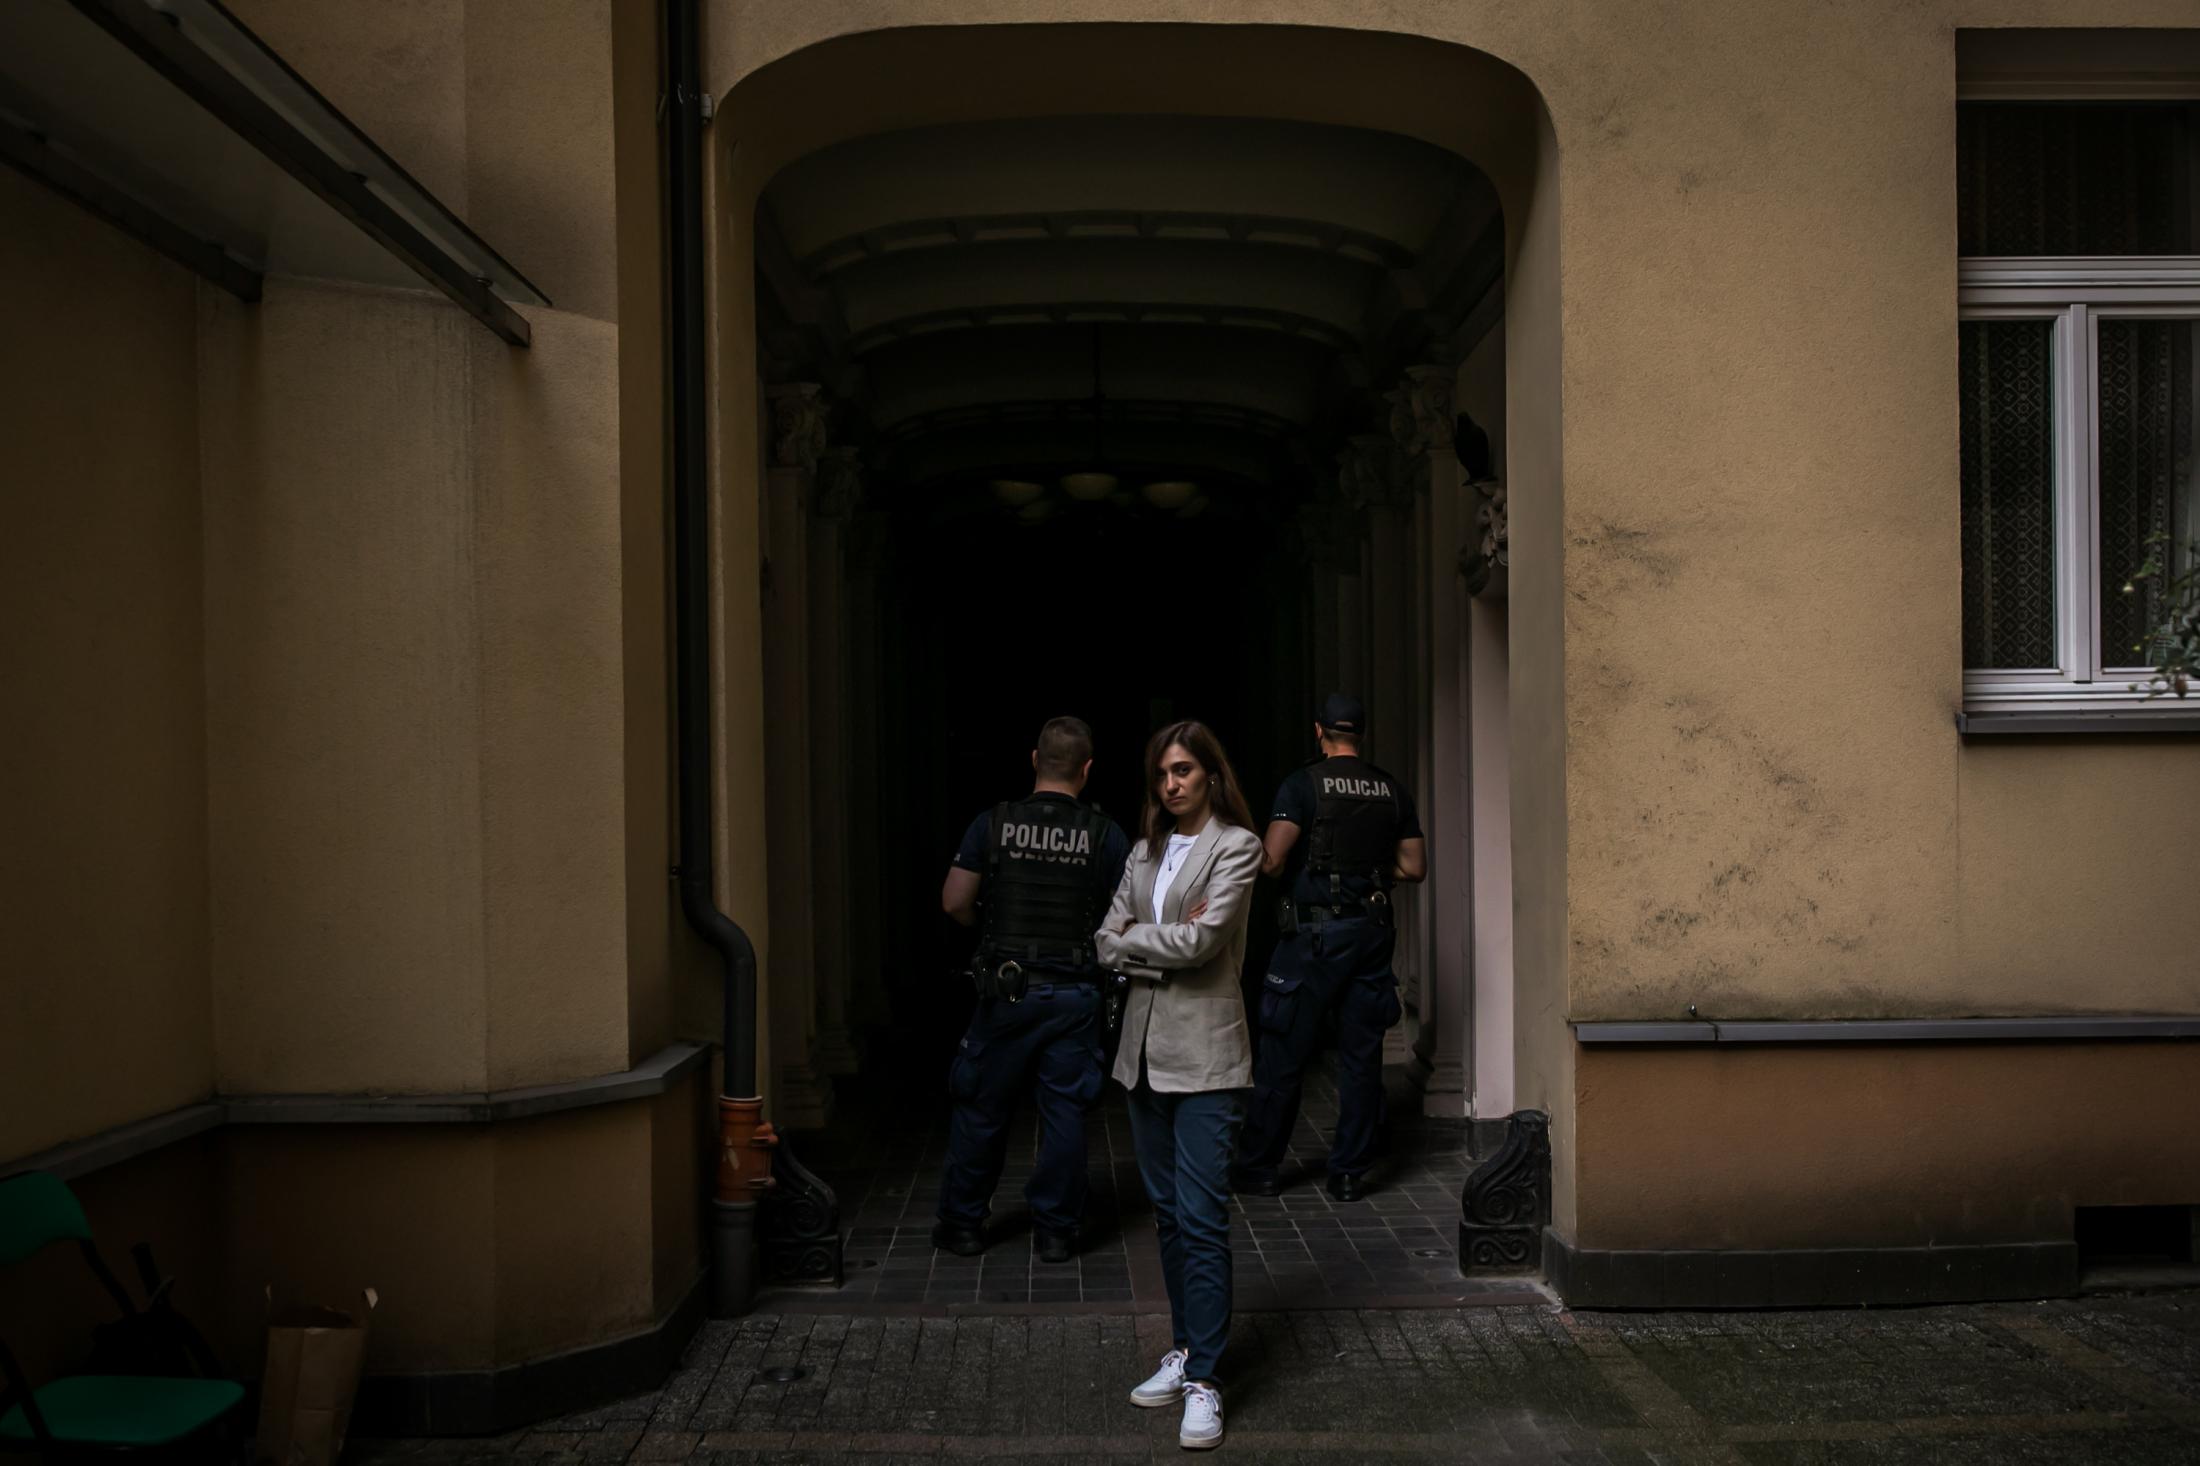 Anastasiya Kozhapenka, a 30-year-old volunteer at the Belarusian community center who was just 6 when she attended her first protest against...